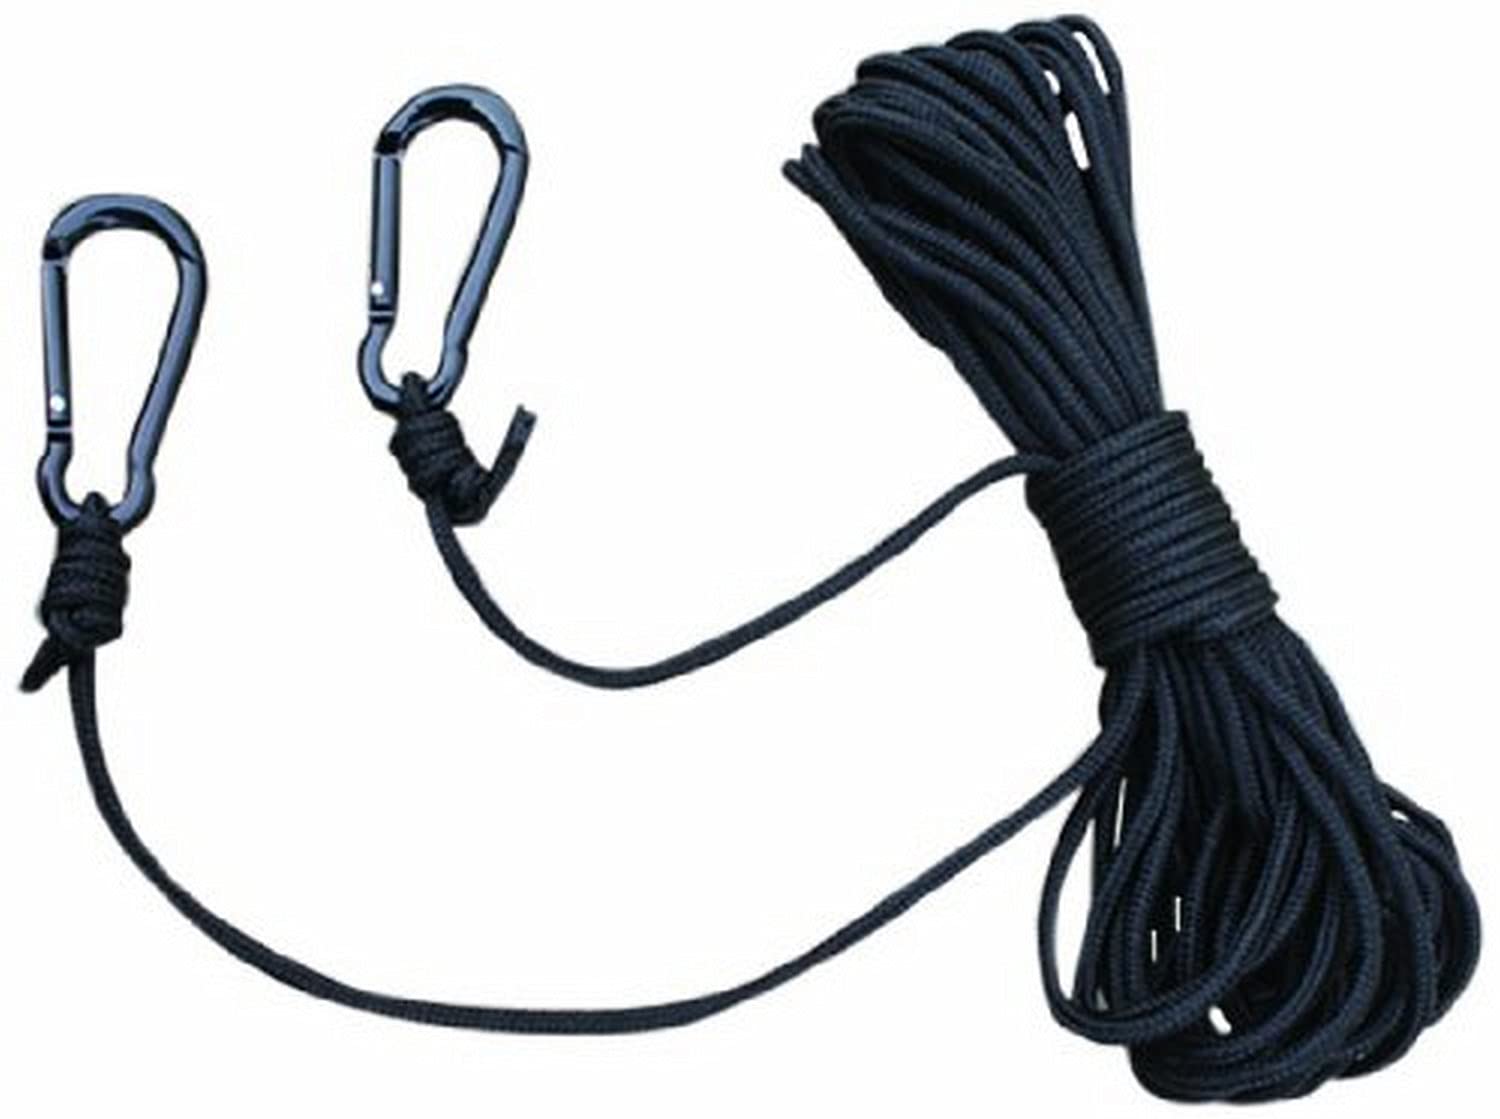 30 ft. Muddy Treestands Bow / Hunting Lift Cord (Black) $2.88 + Free Shipping w/ Prime or on $35+